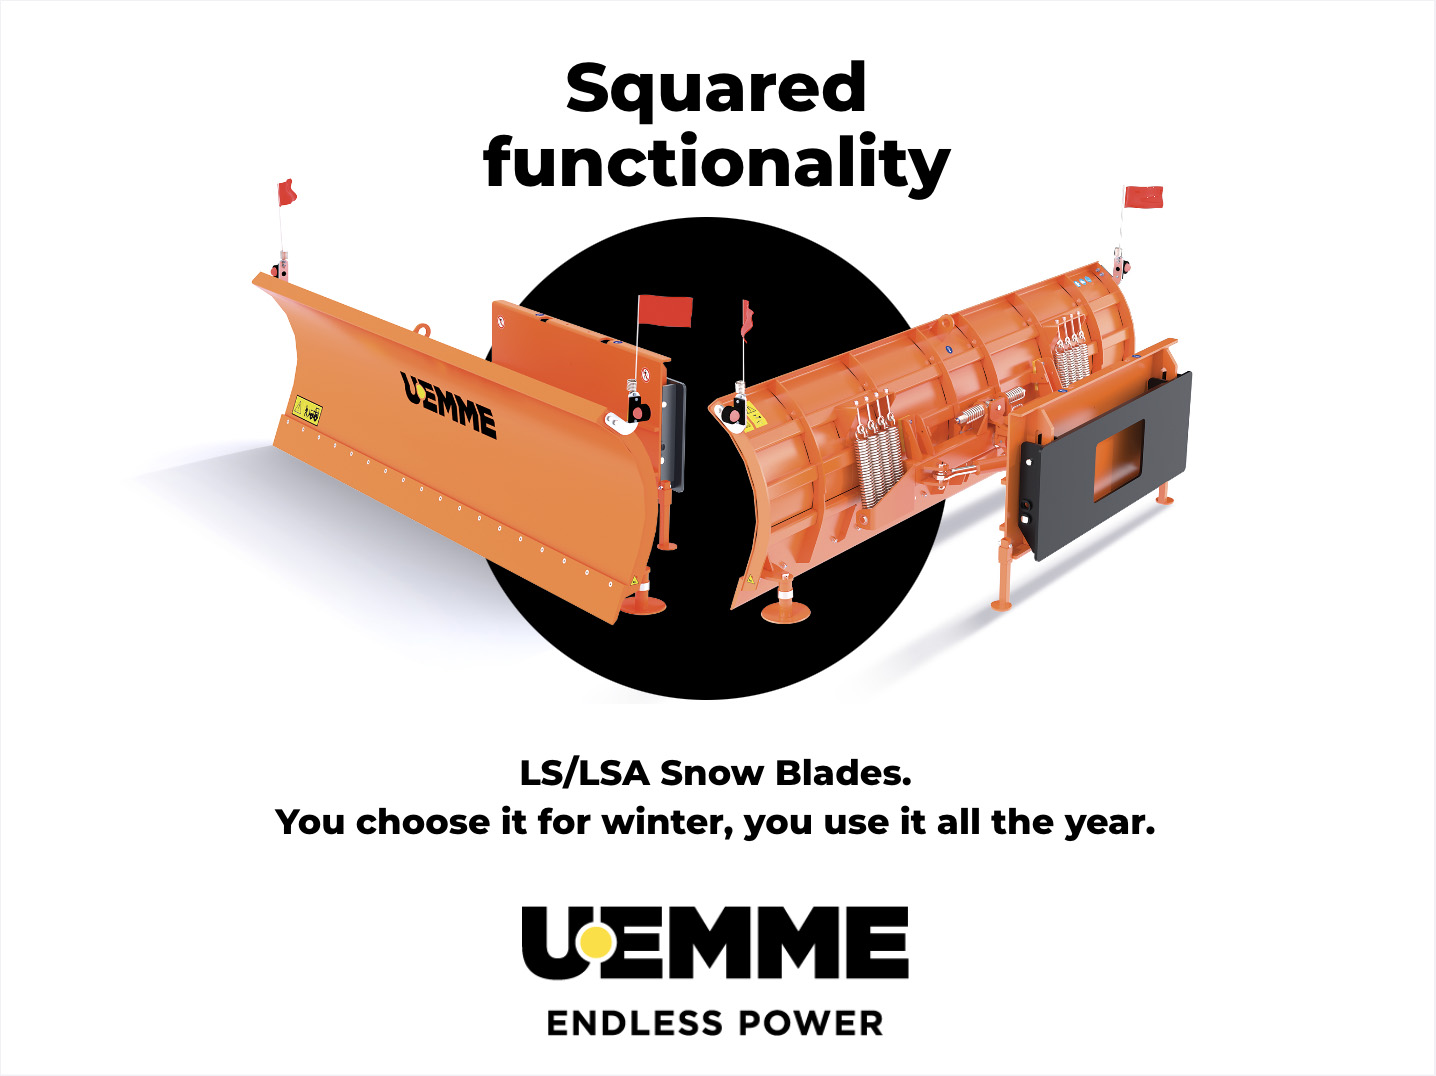 THE SNOW BLADES LS AND LSA BY U.EMME: PERFECT FOR REMOVING SNOW AND MORE!